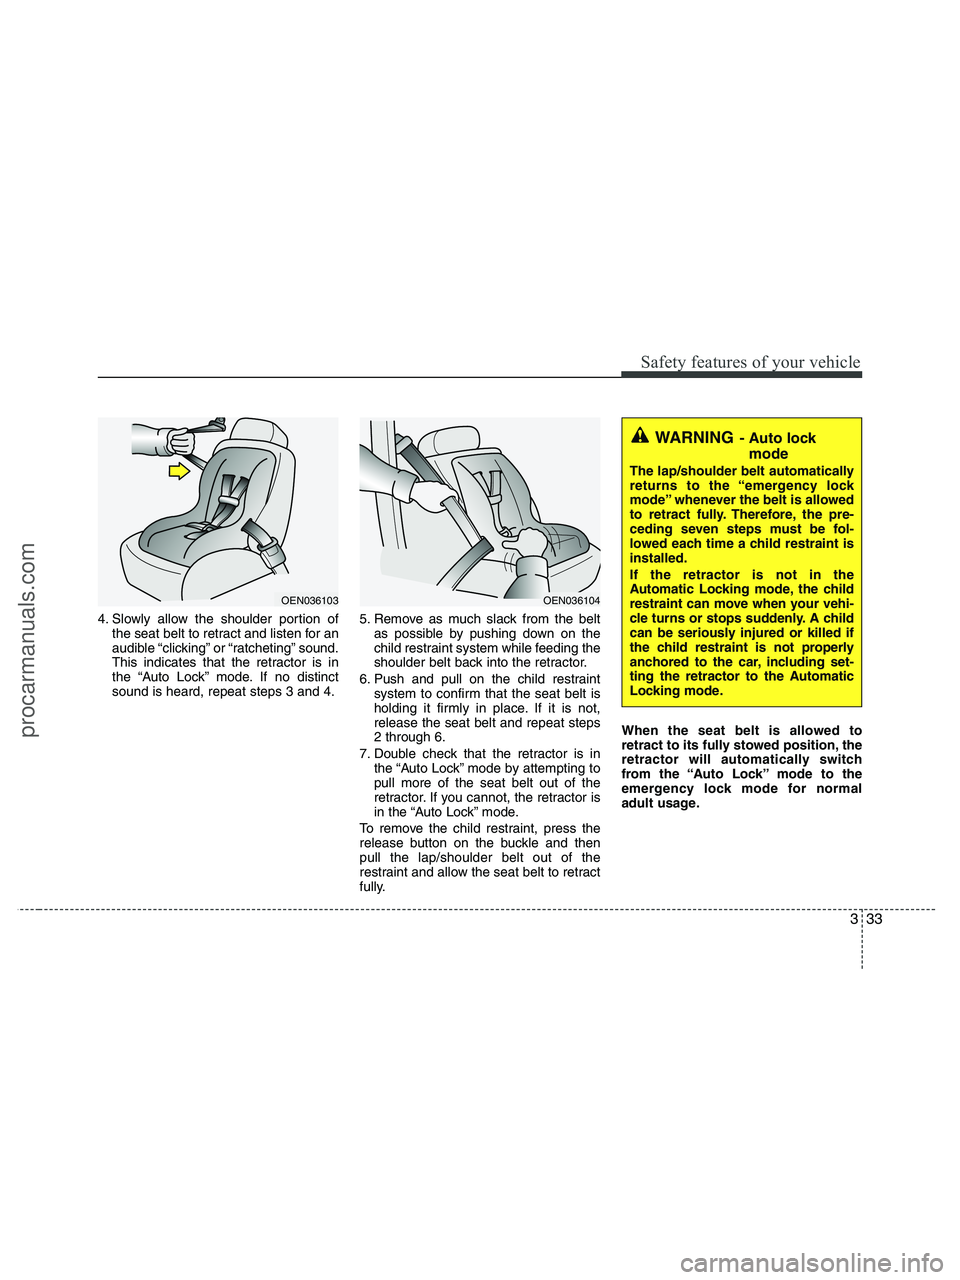 HYUNDAI VERACRUZ 2010 Workshop Manual 333
Safety features of your vehicle
4. Slowly allow the shoulder portion of
the seat belt to retract and listen for an
audible “clicking” or “ratcheting” sound.
This indicates that the retract